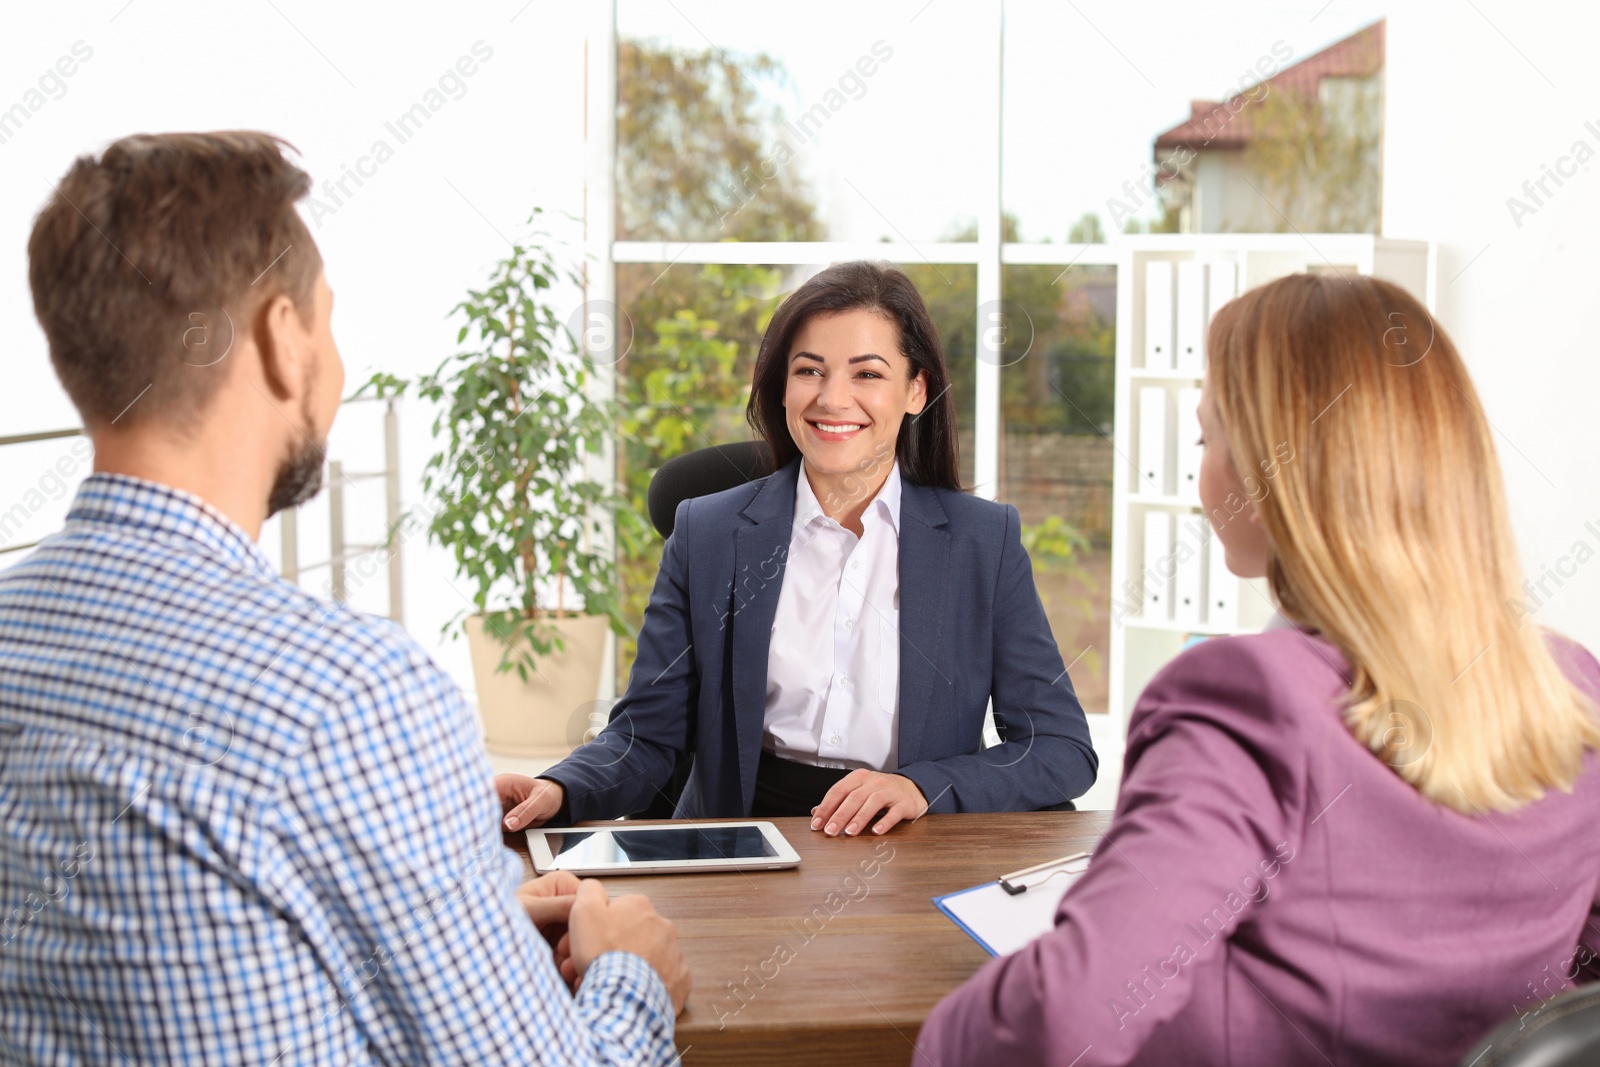 Photo of Human resources manager conducting job interview with applicants in office